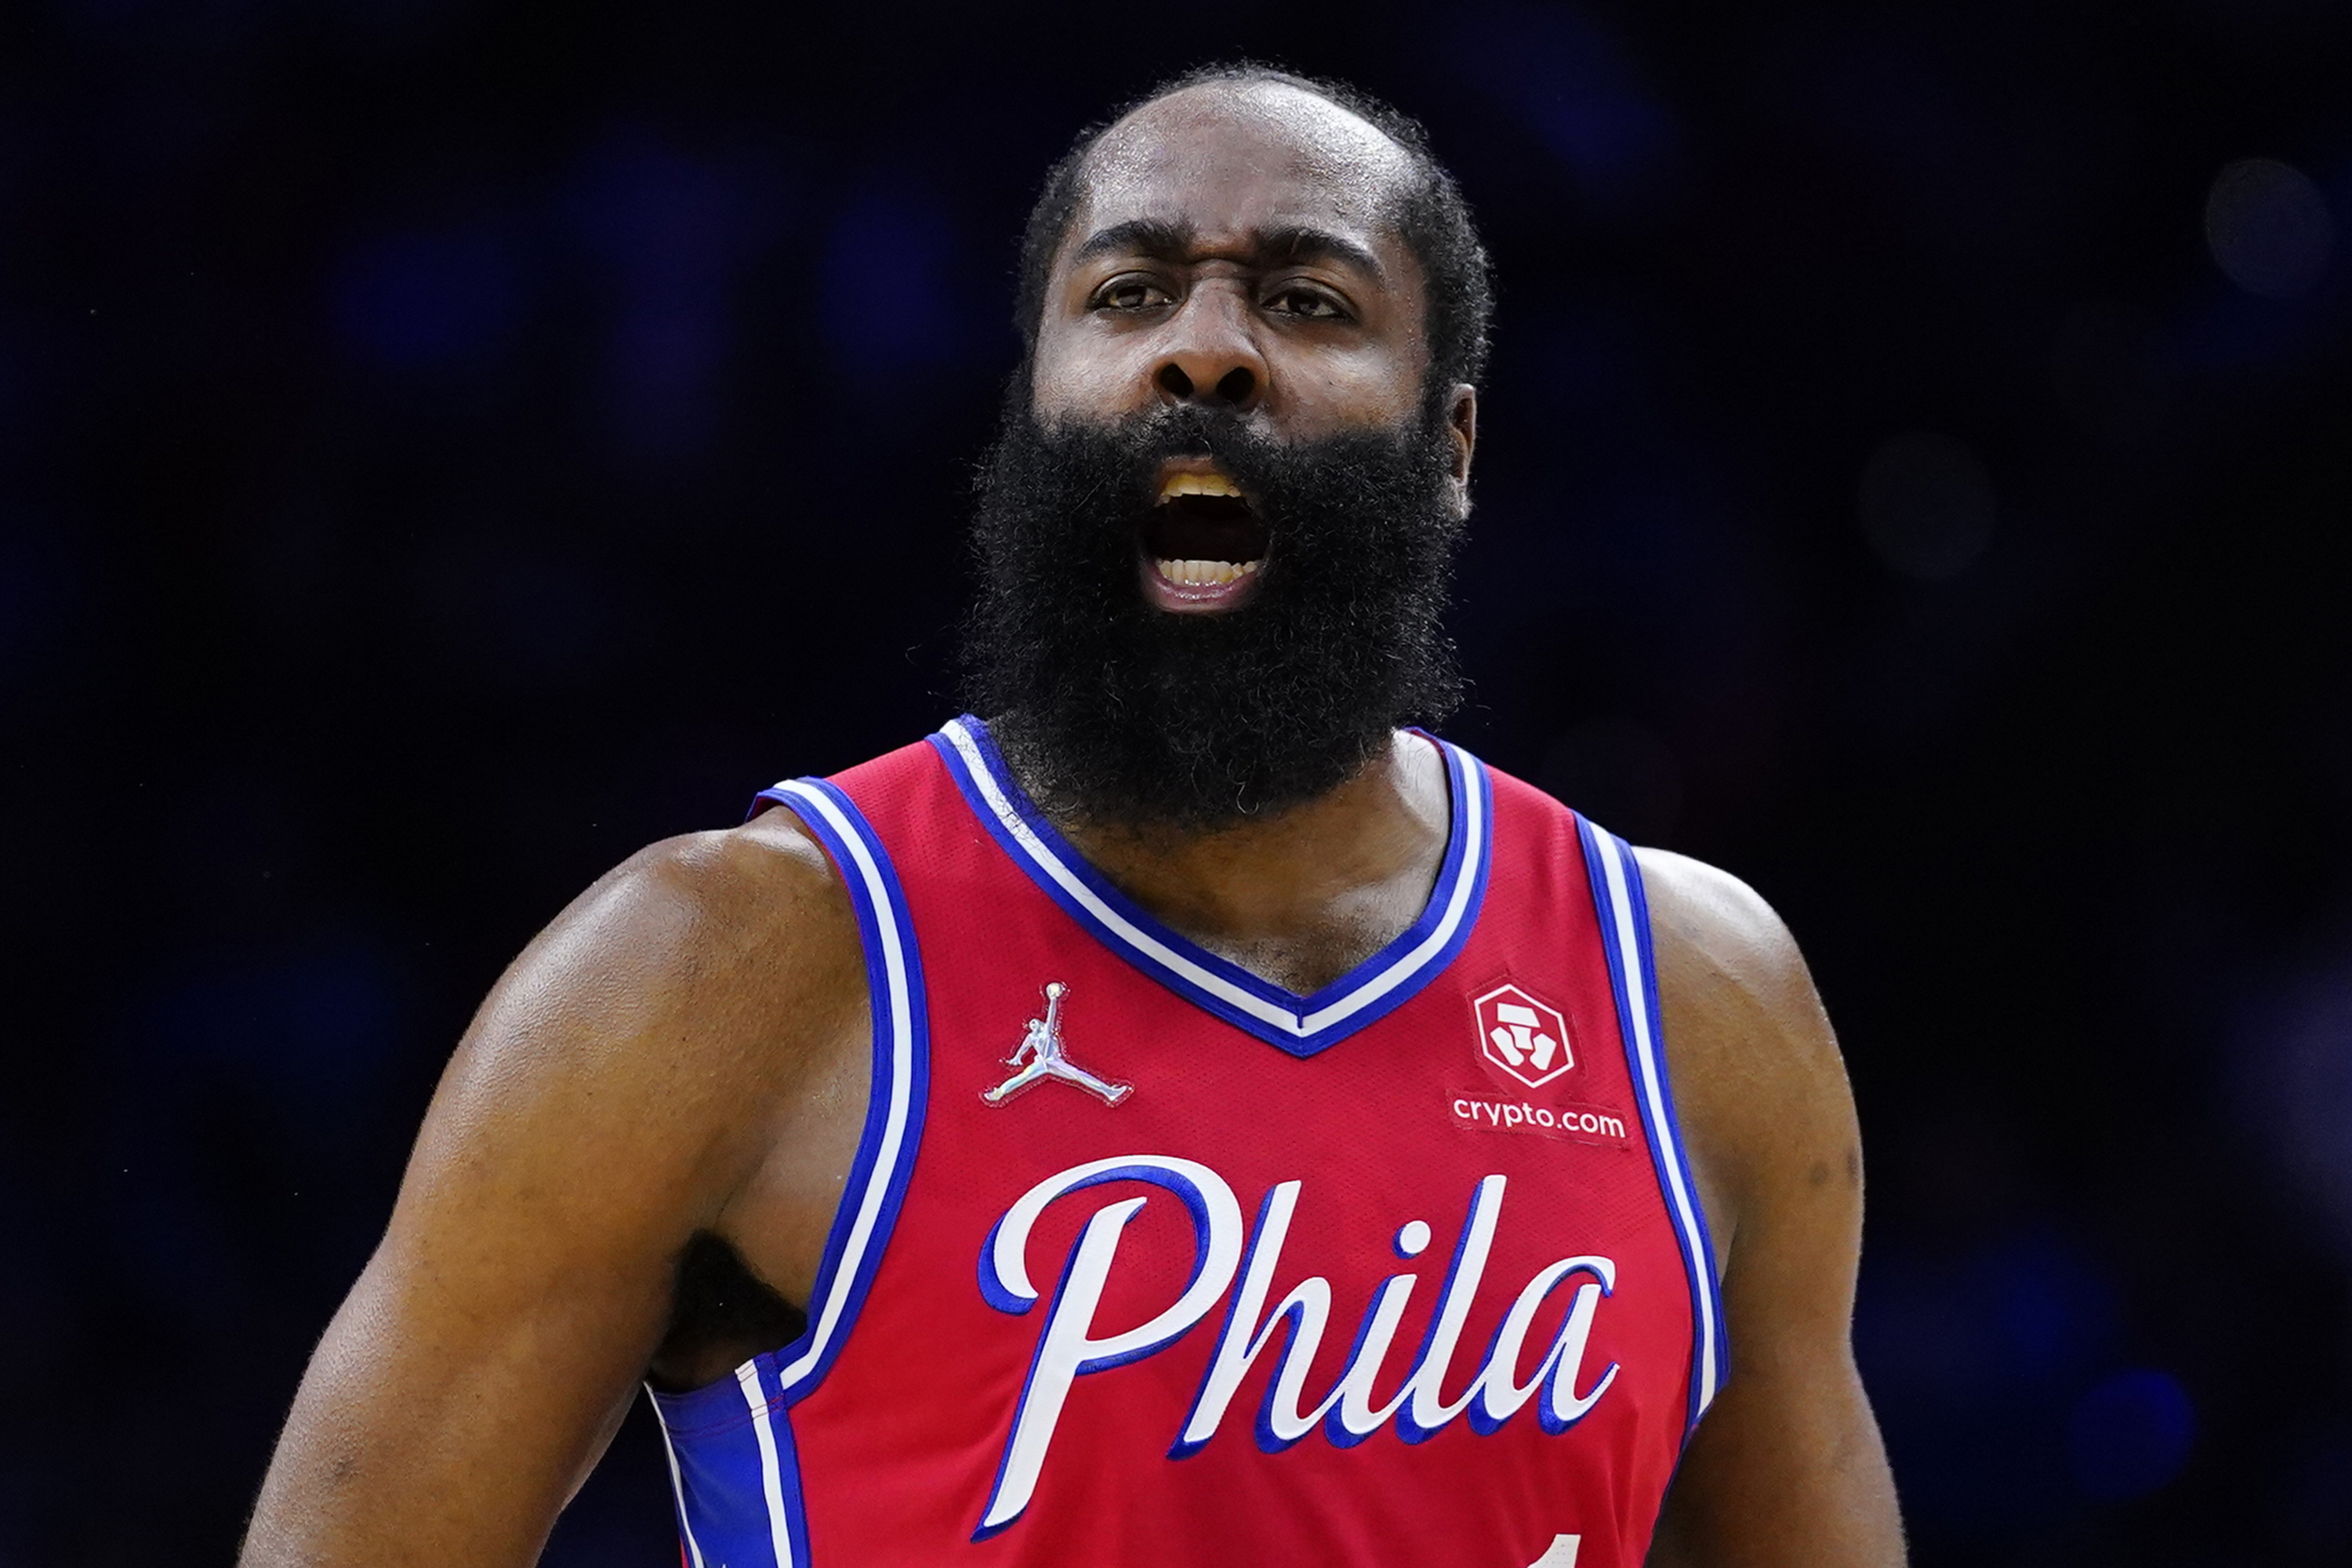 James Harden admits food gets stuck in his beard 'all of the time